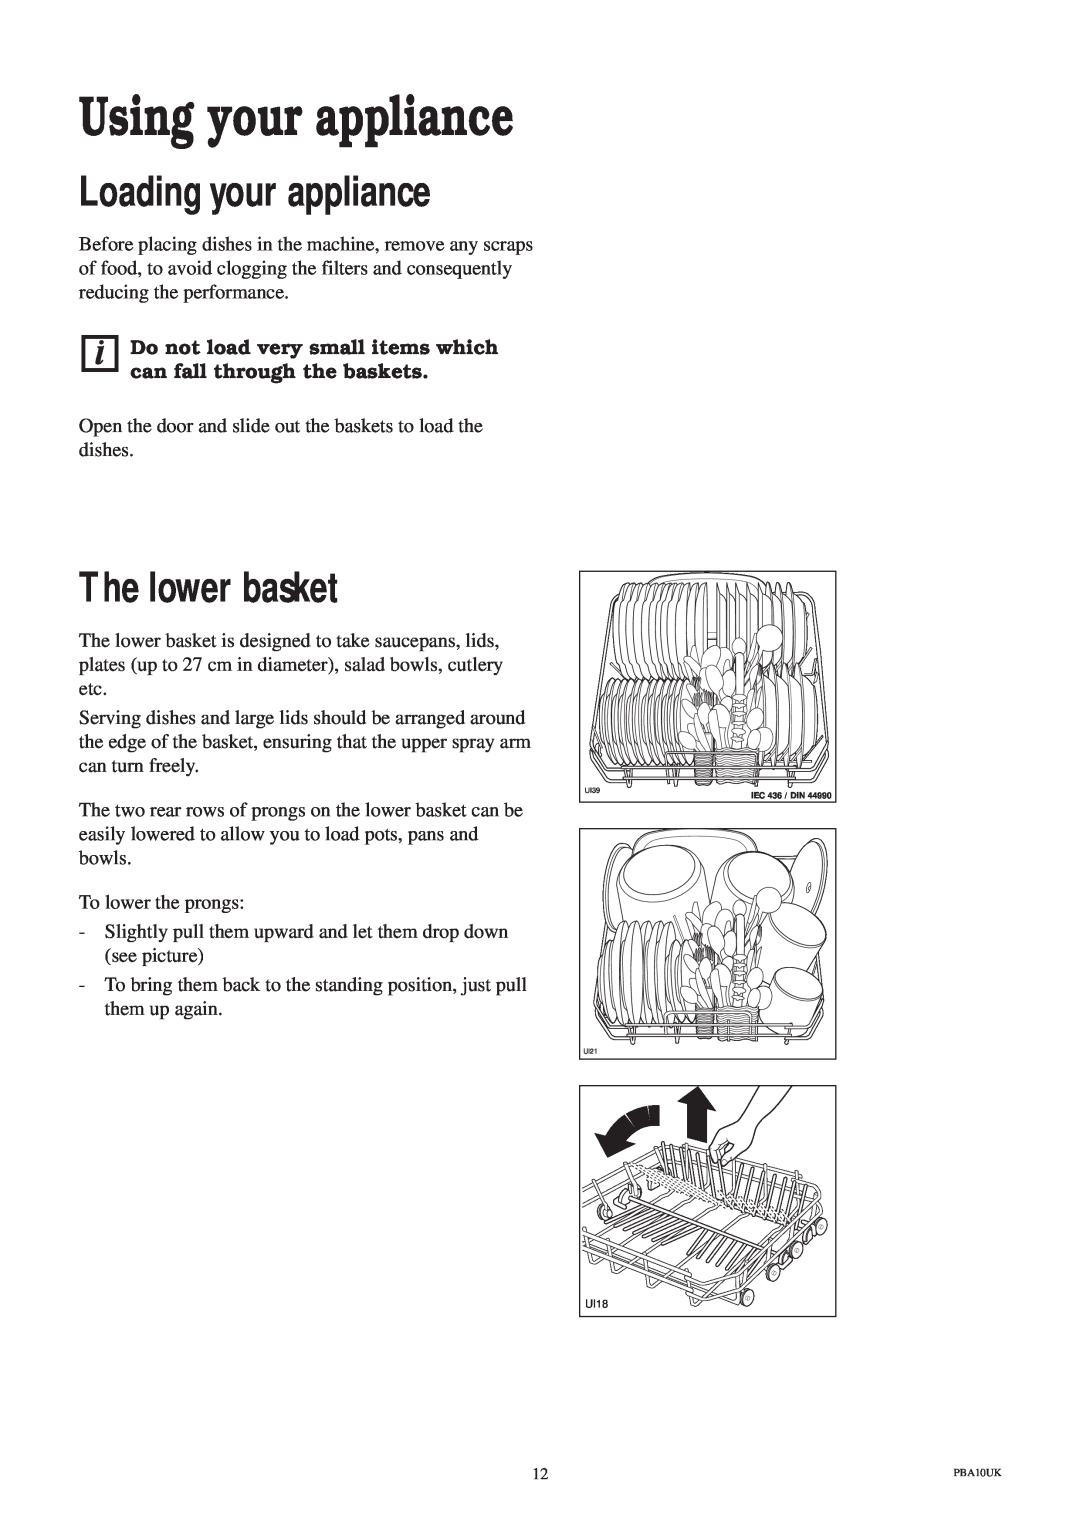 Zanussi ZDS 689 EX manual Using your appliance, Loading your appliance, The lower basket 